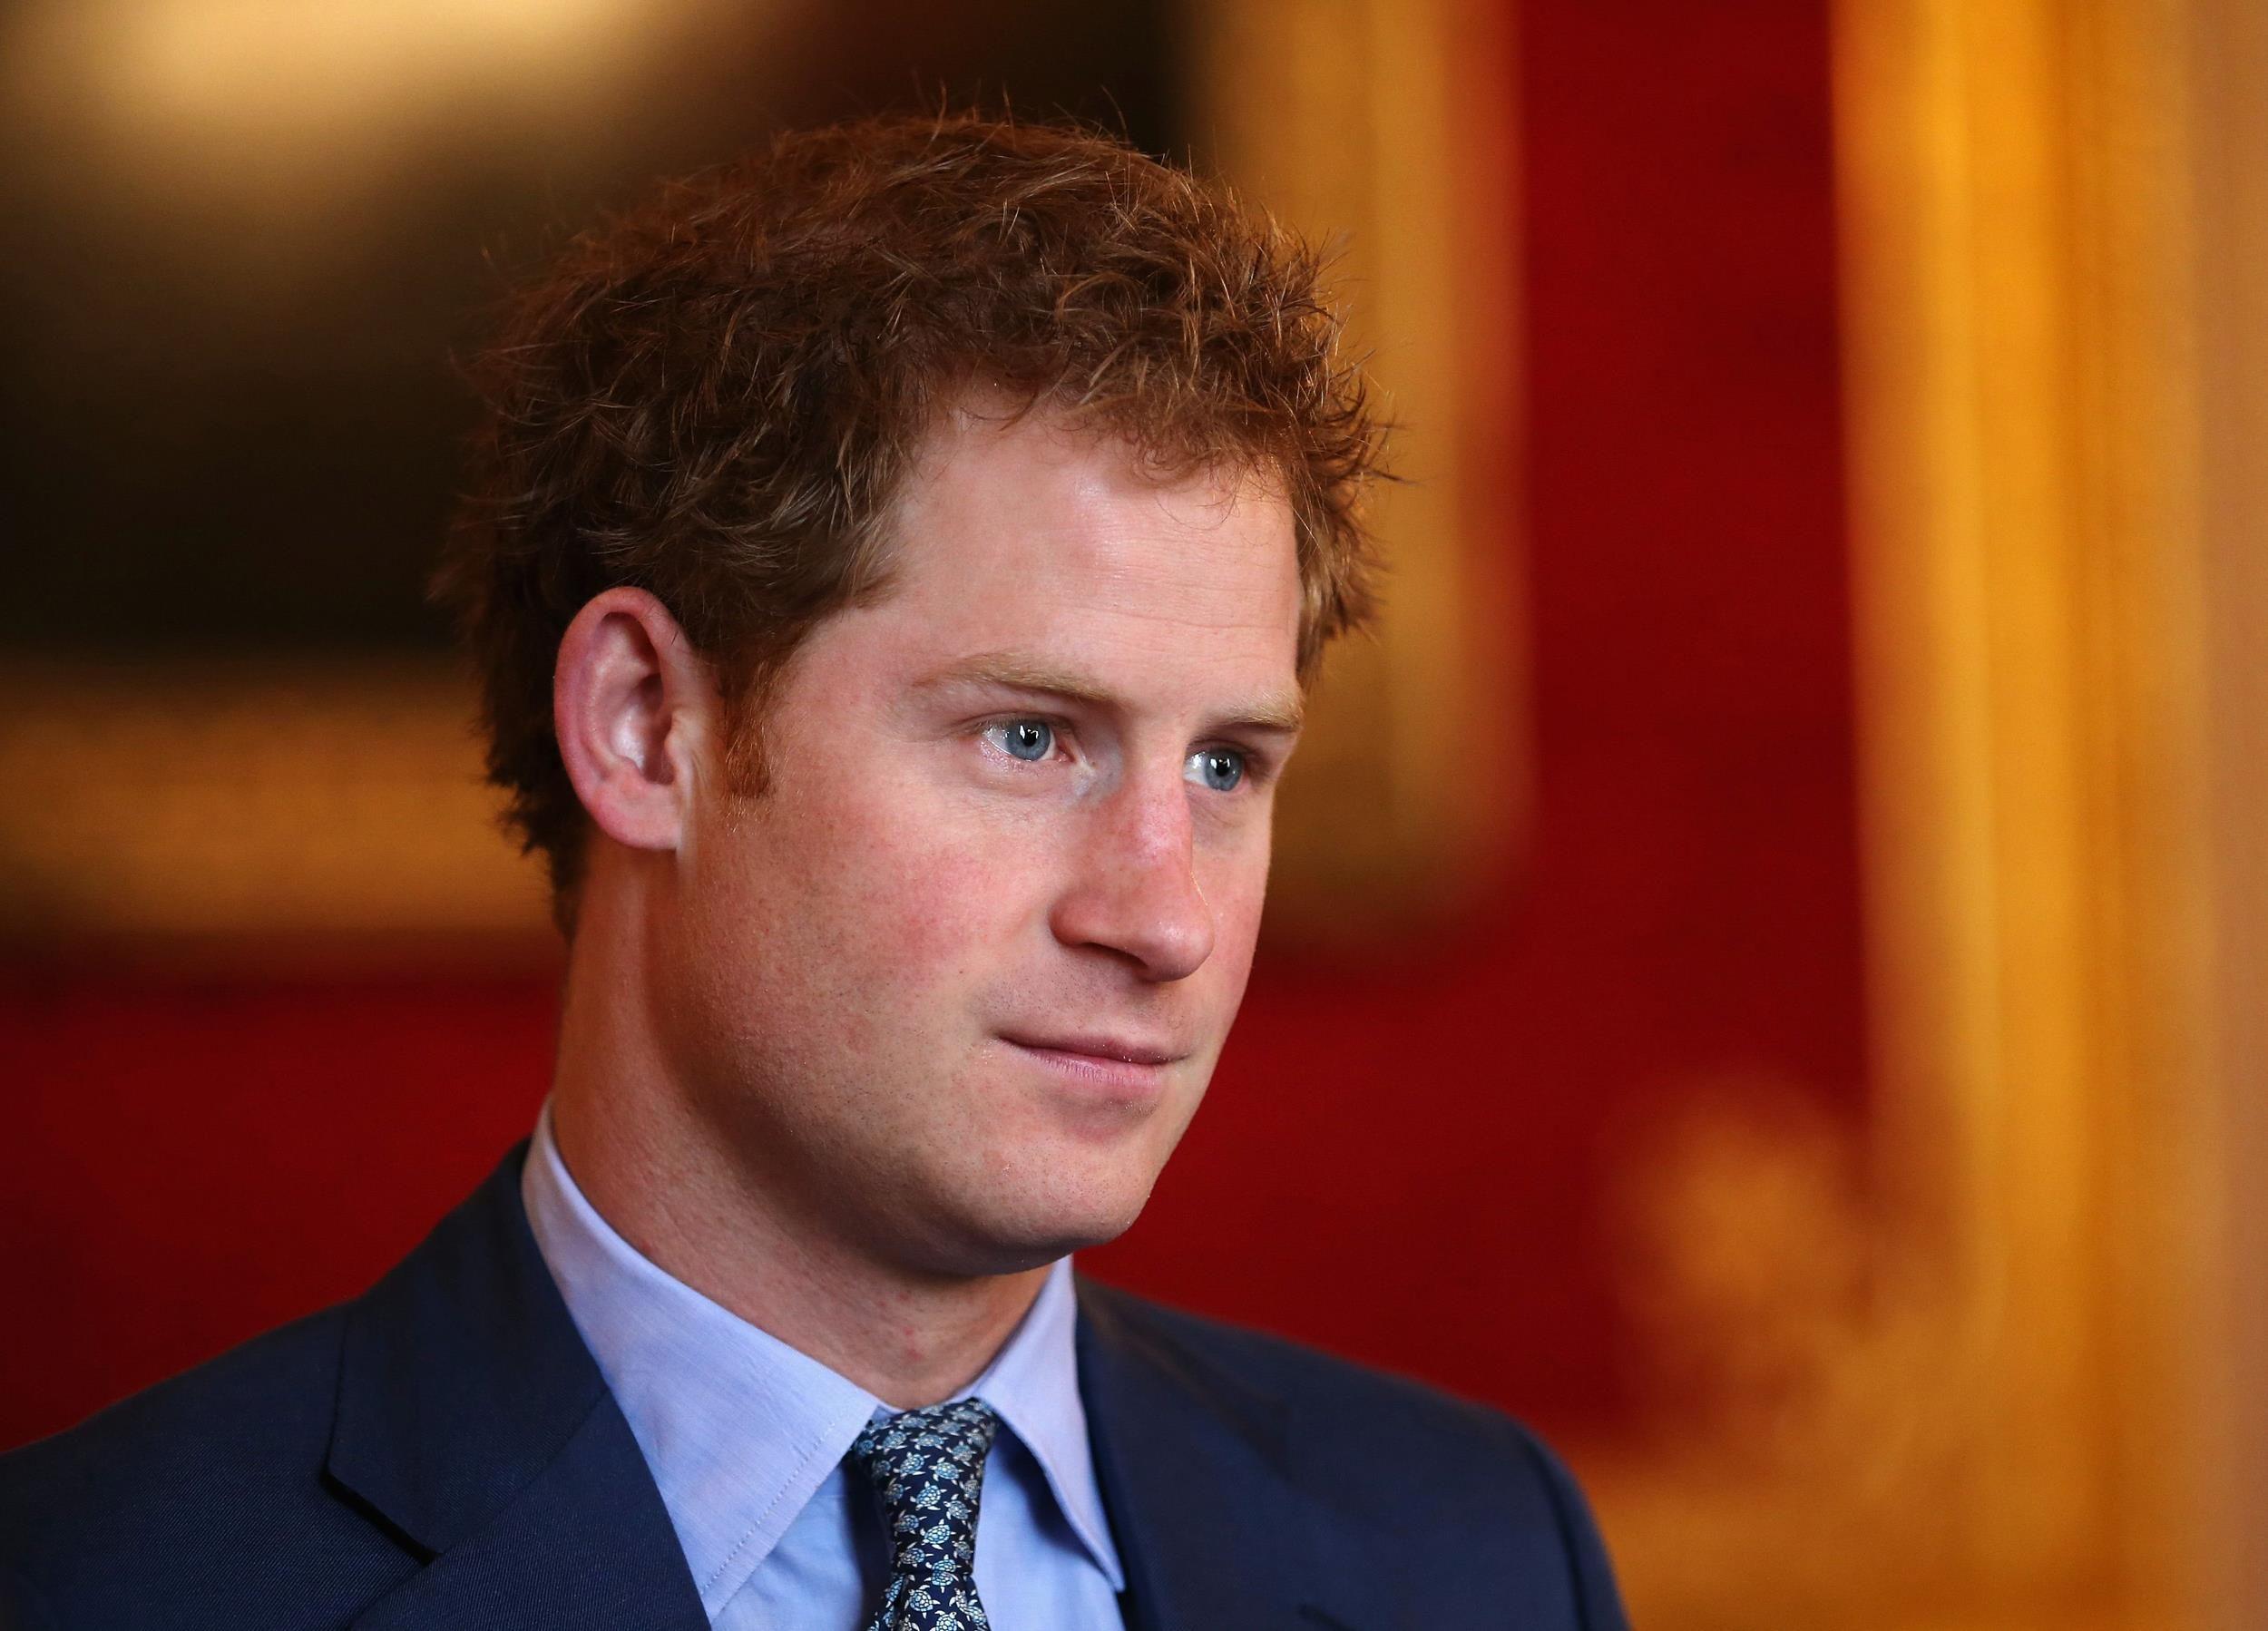 Prince Harry Wallpaper Pack Download